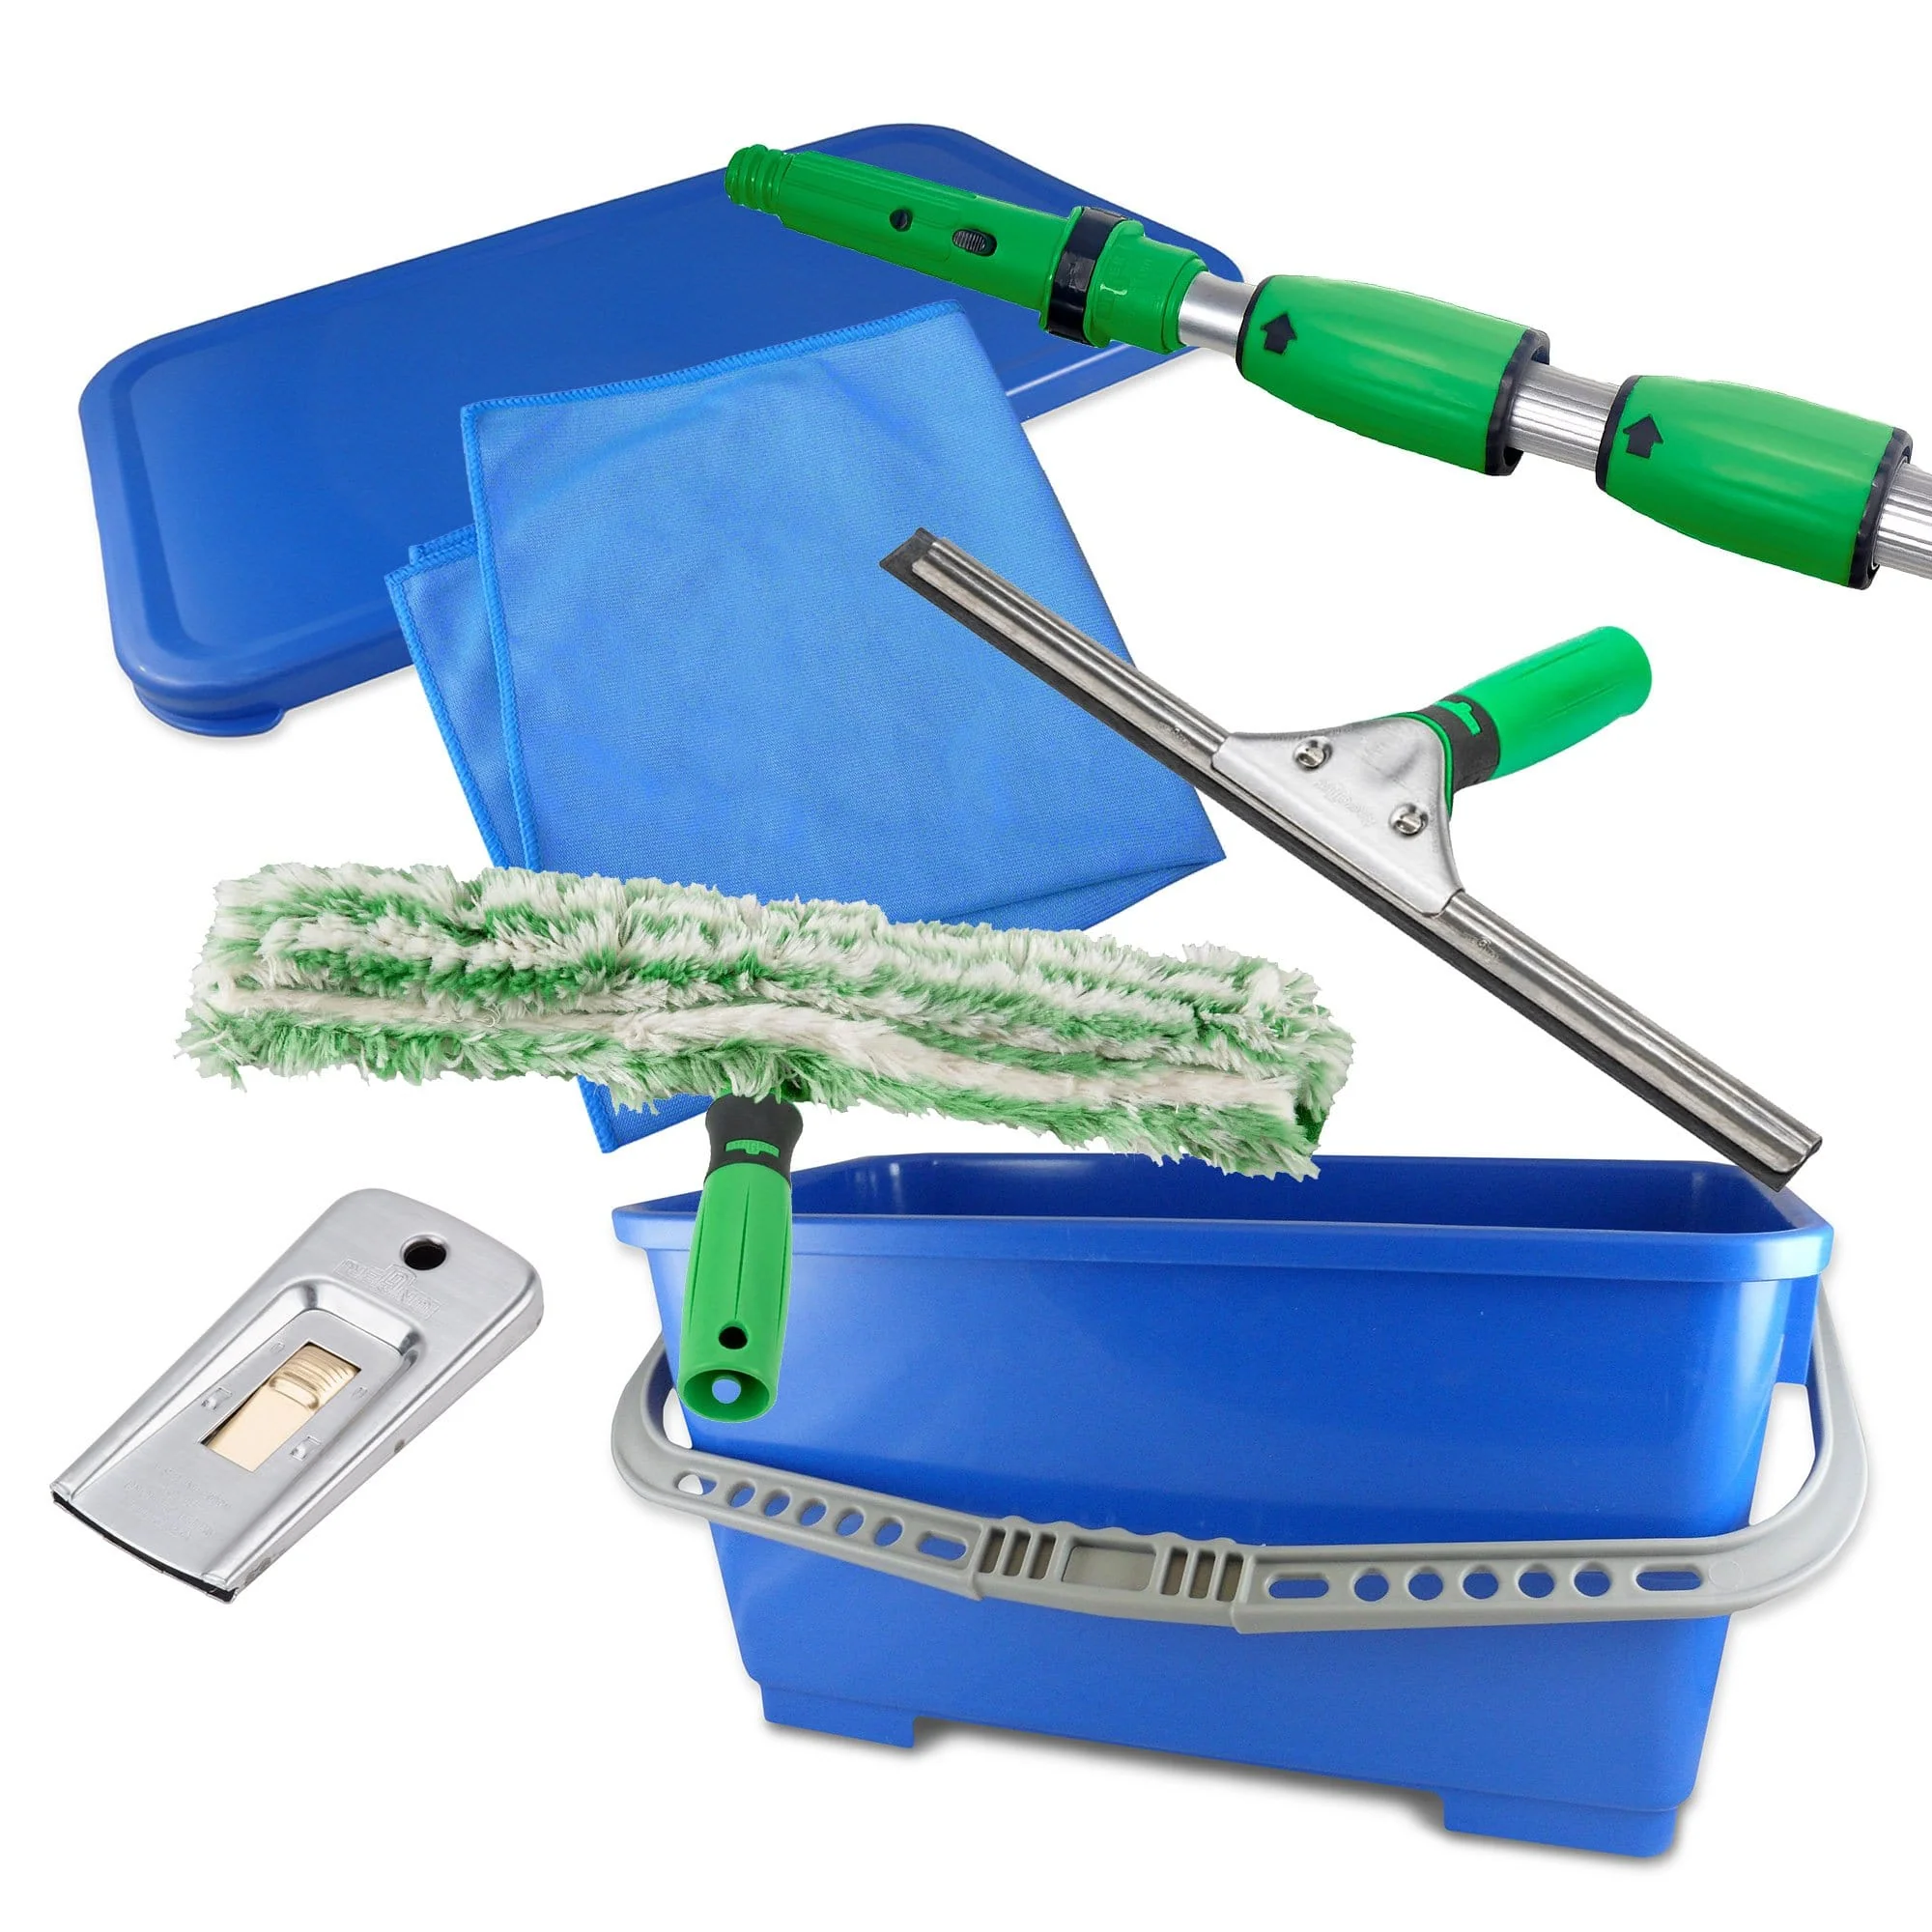 Complete List of Window Cleaning Supplies